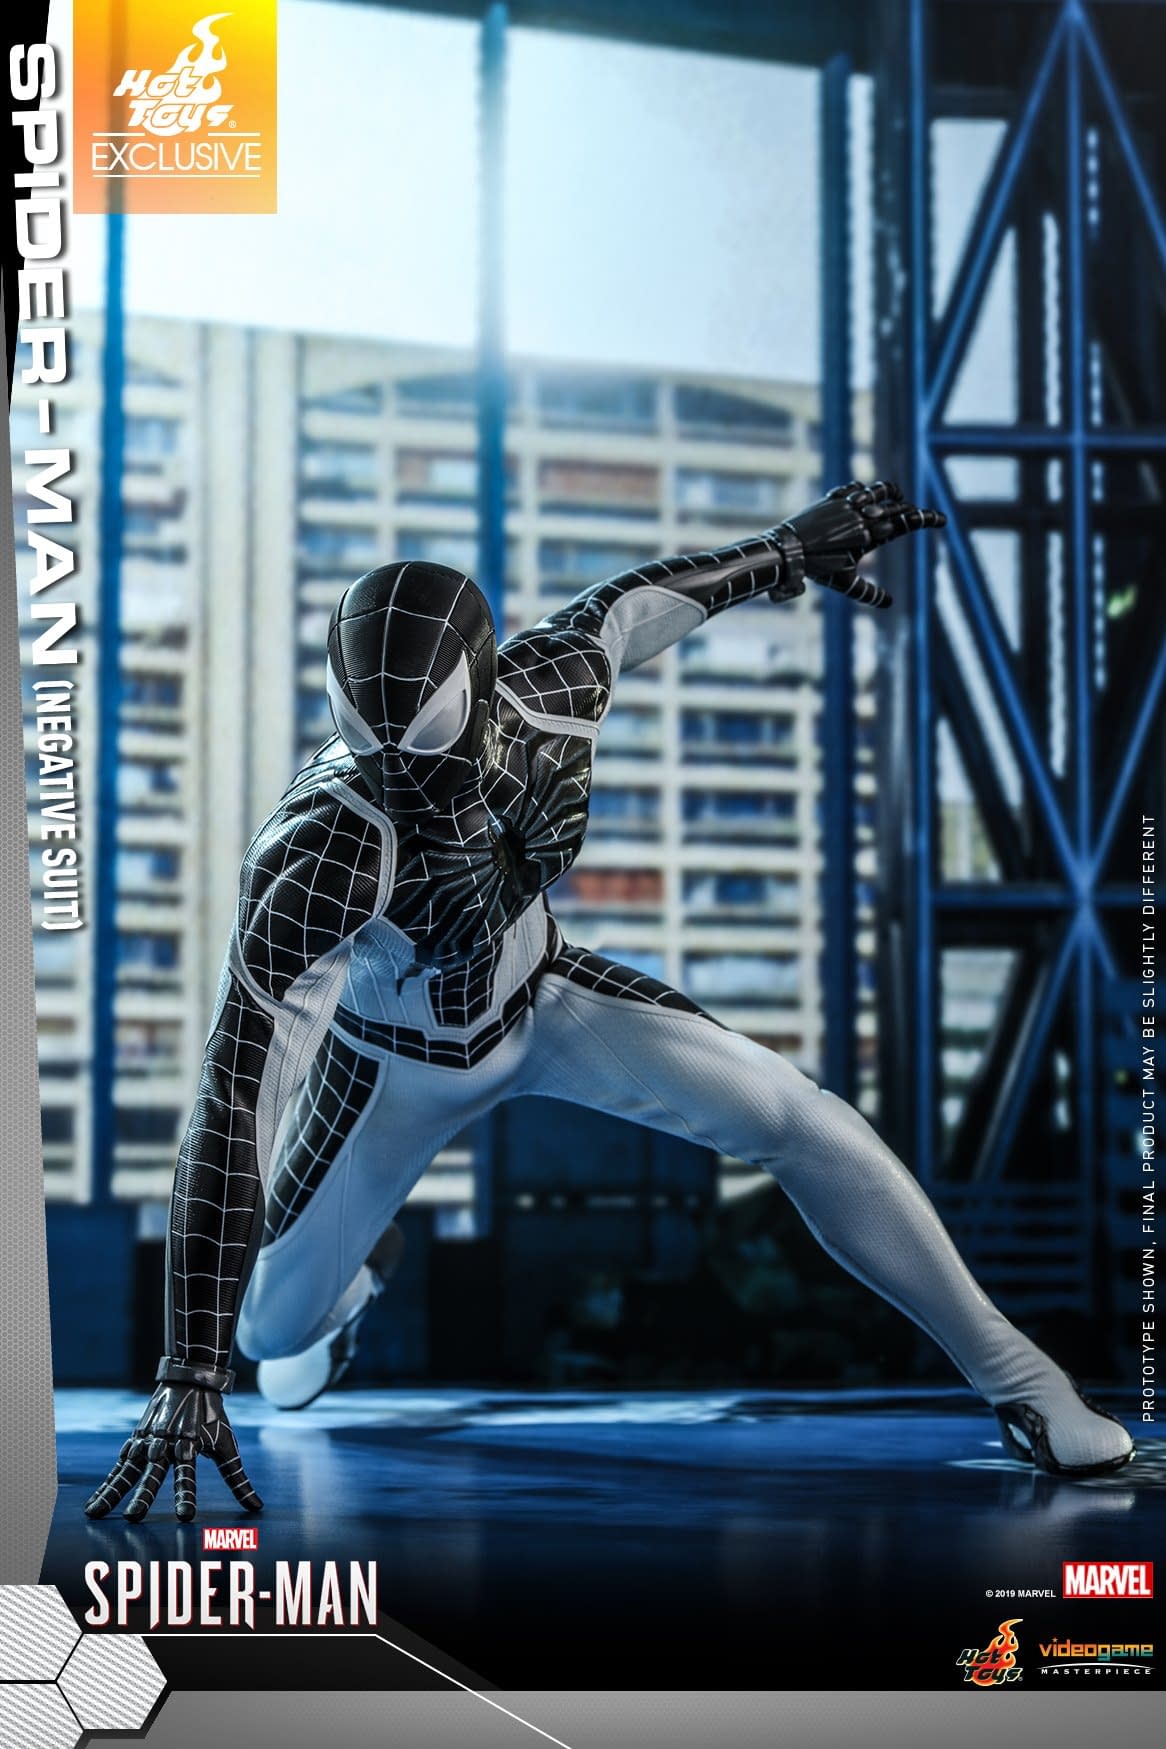 Hot Toys expands Movie Masterpieces line with Spider-Man's Doctor